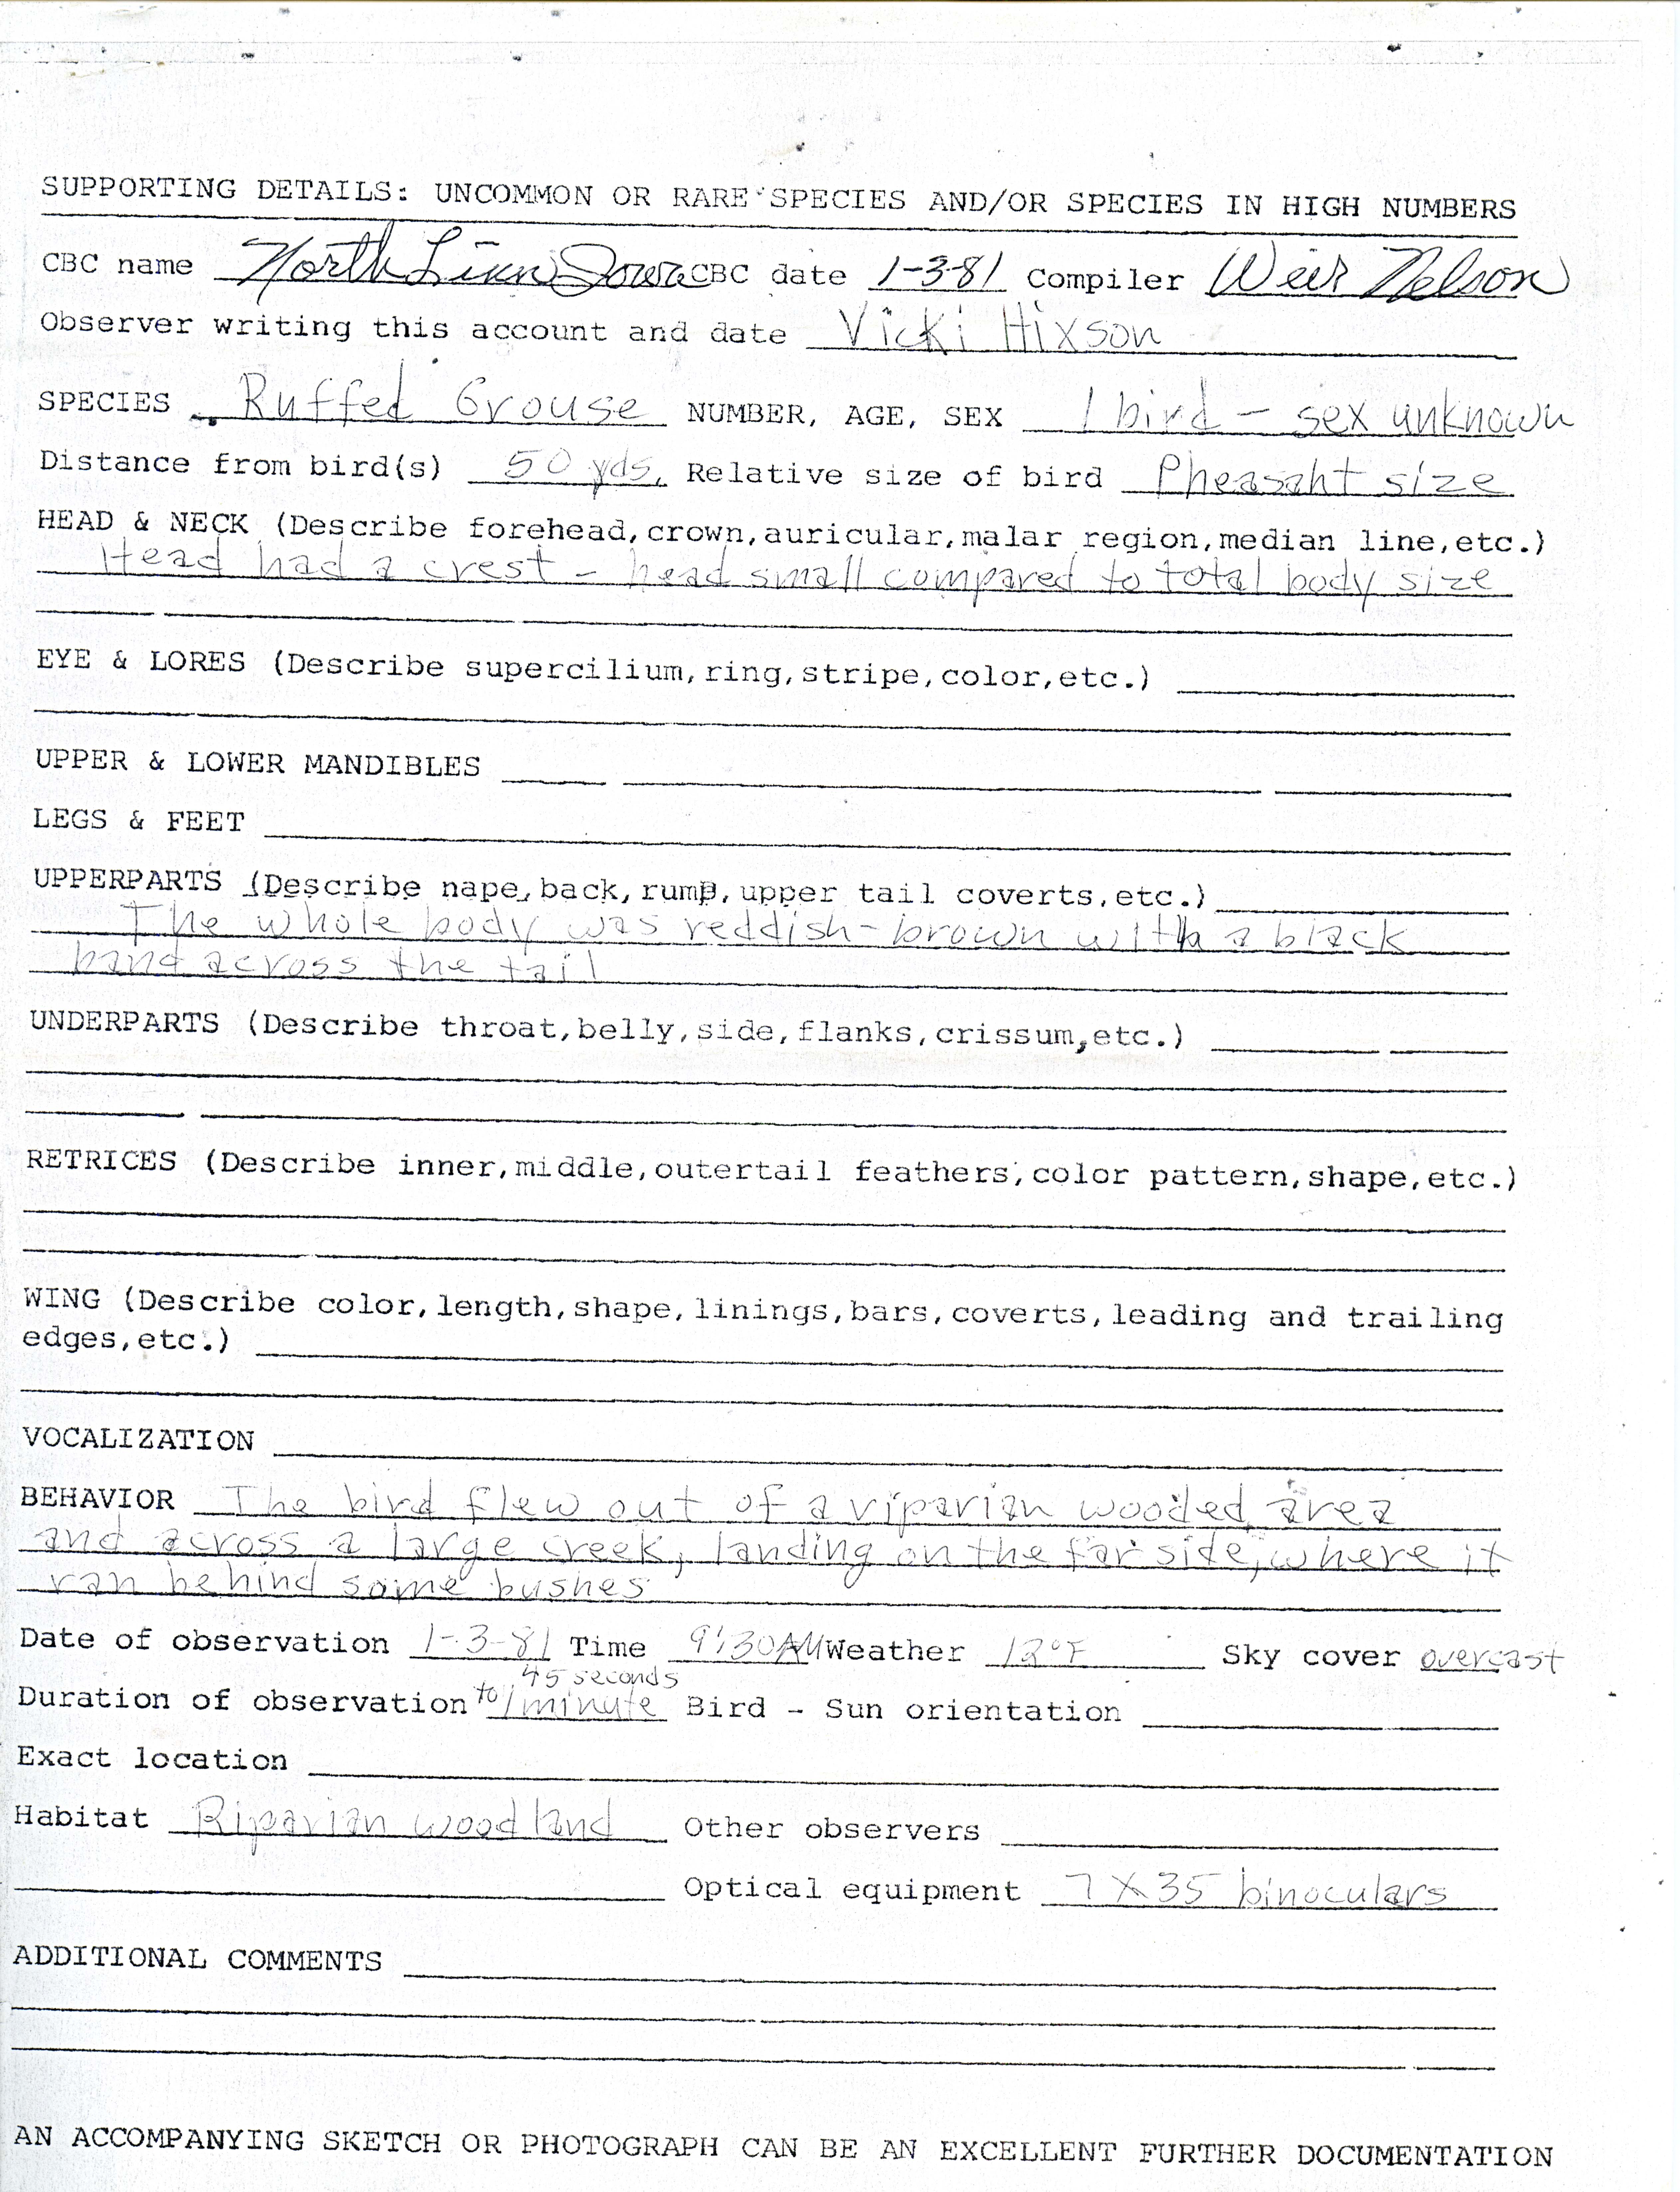 Supporting details form for Ruffed Grouse sighting submitted by Vicki Hixon, January 3 1981